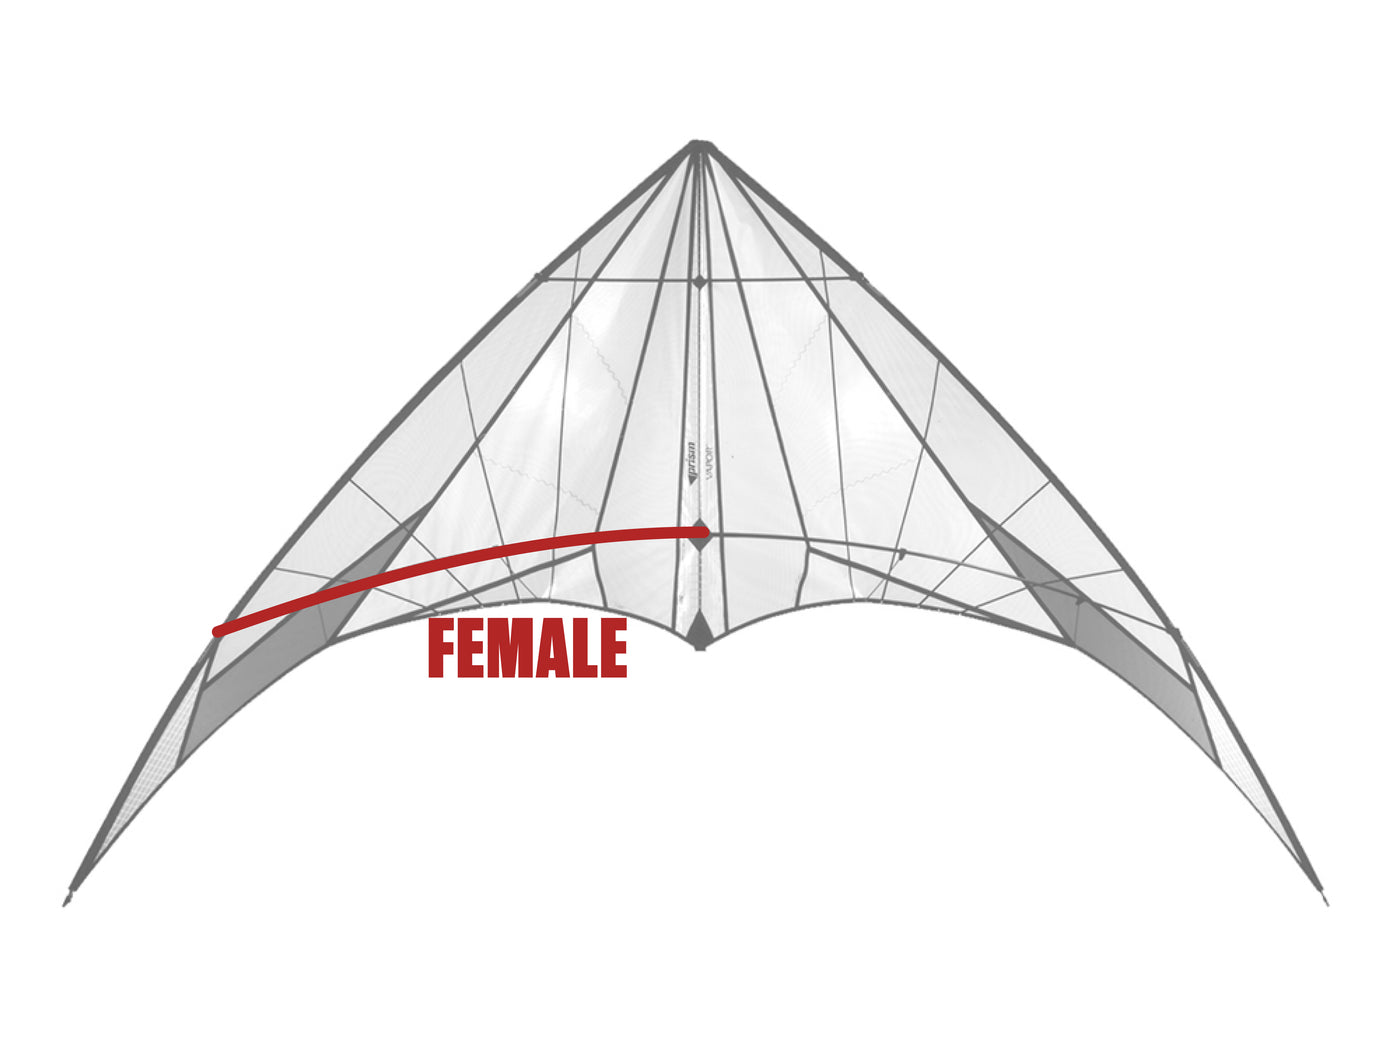 Diagram showing location of the Vapor Lower Spreader (Female) on the kite.